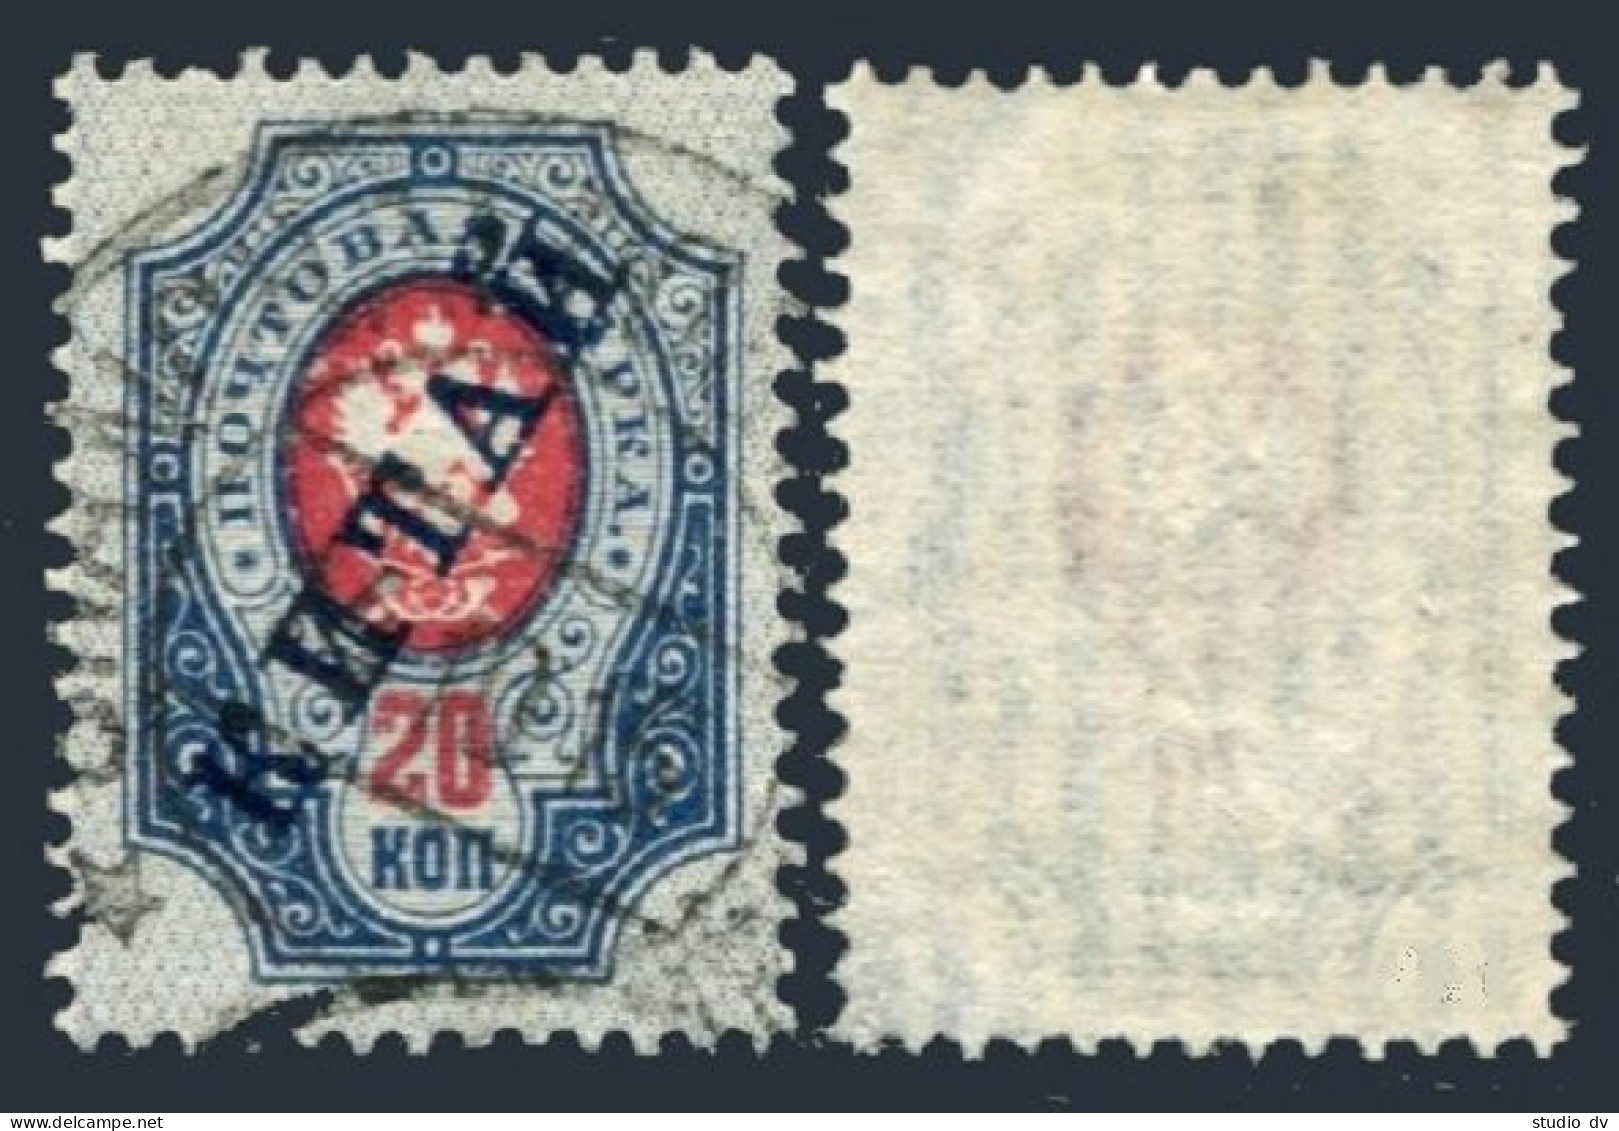 Russian Offices In China 14,used.Michel 10y. 20 Kop.surcharged,1907. - China